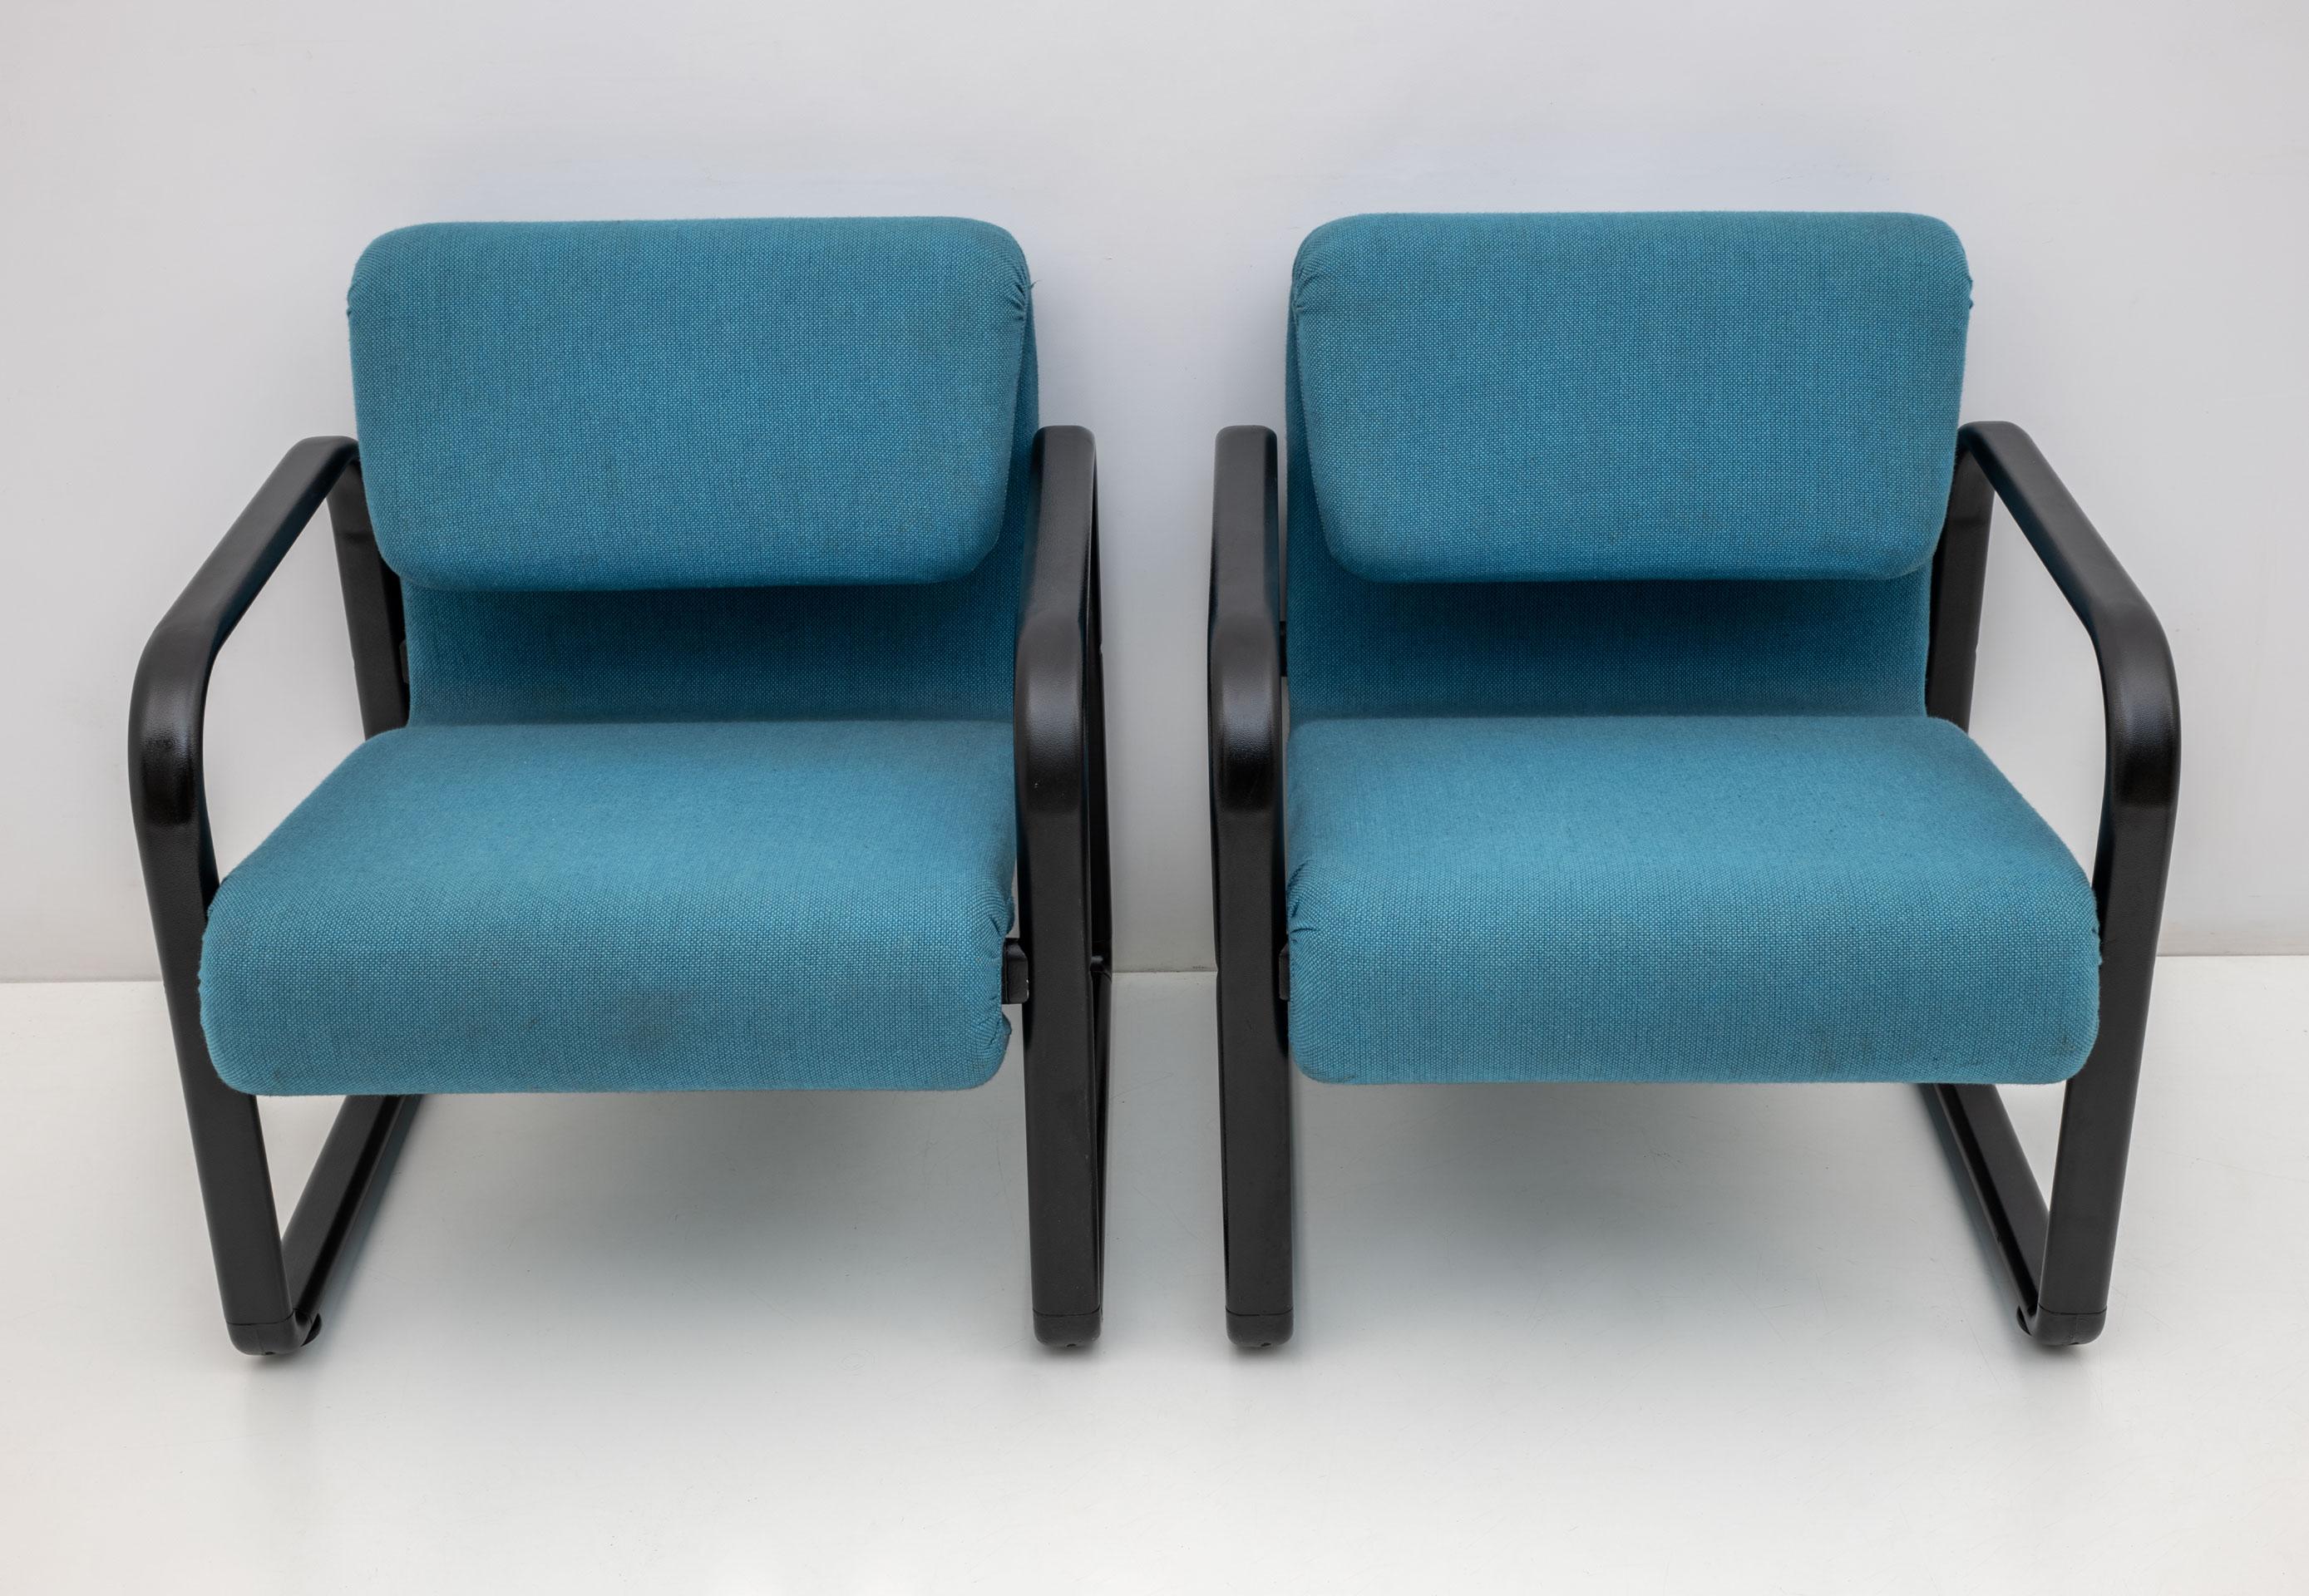 Late 20th Century Post-Modern Italian Fabric and Metal Armchairs by Arflex, 70s For Sale